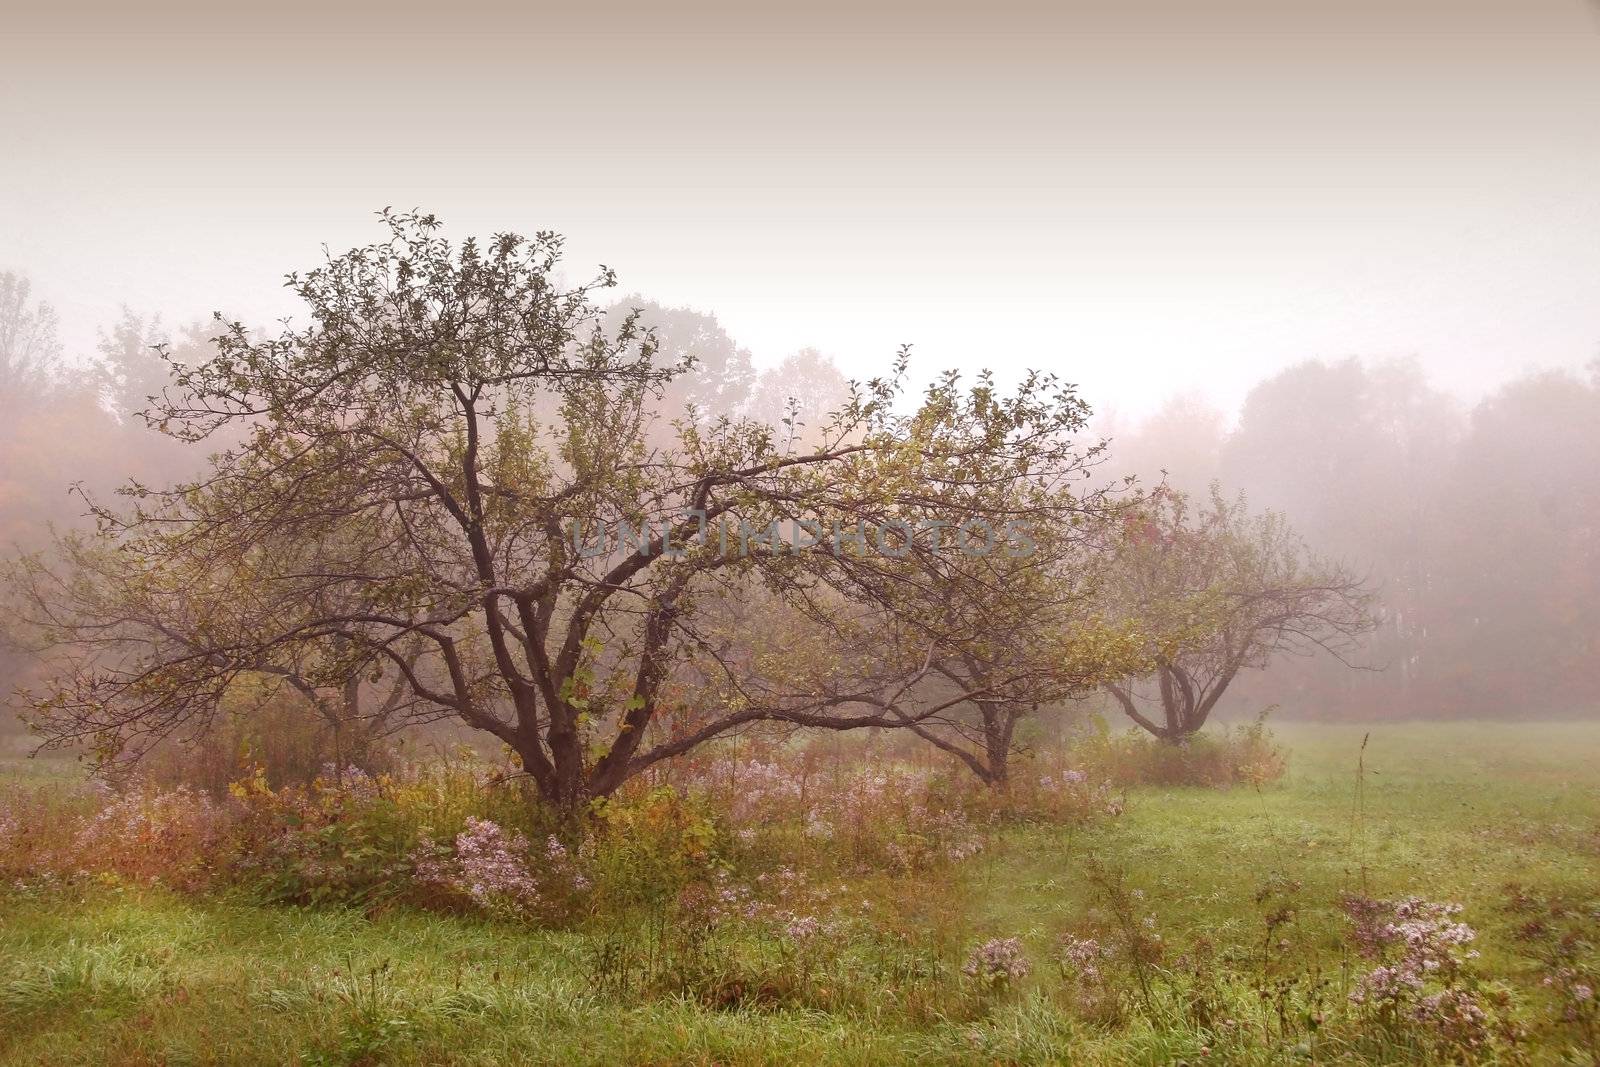 Apples trees in the mist by Sandralise